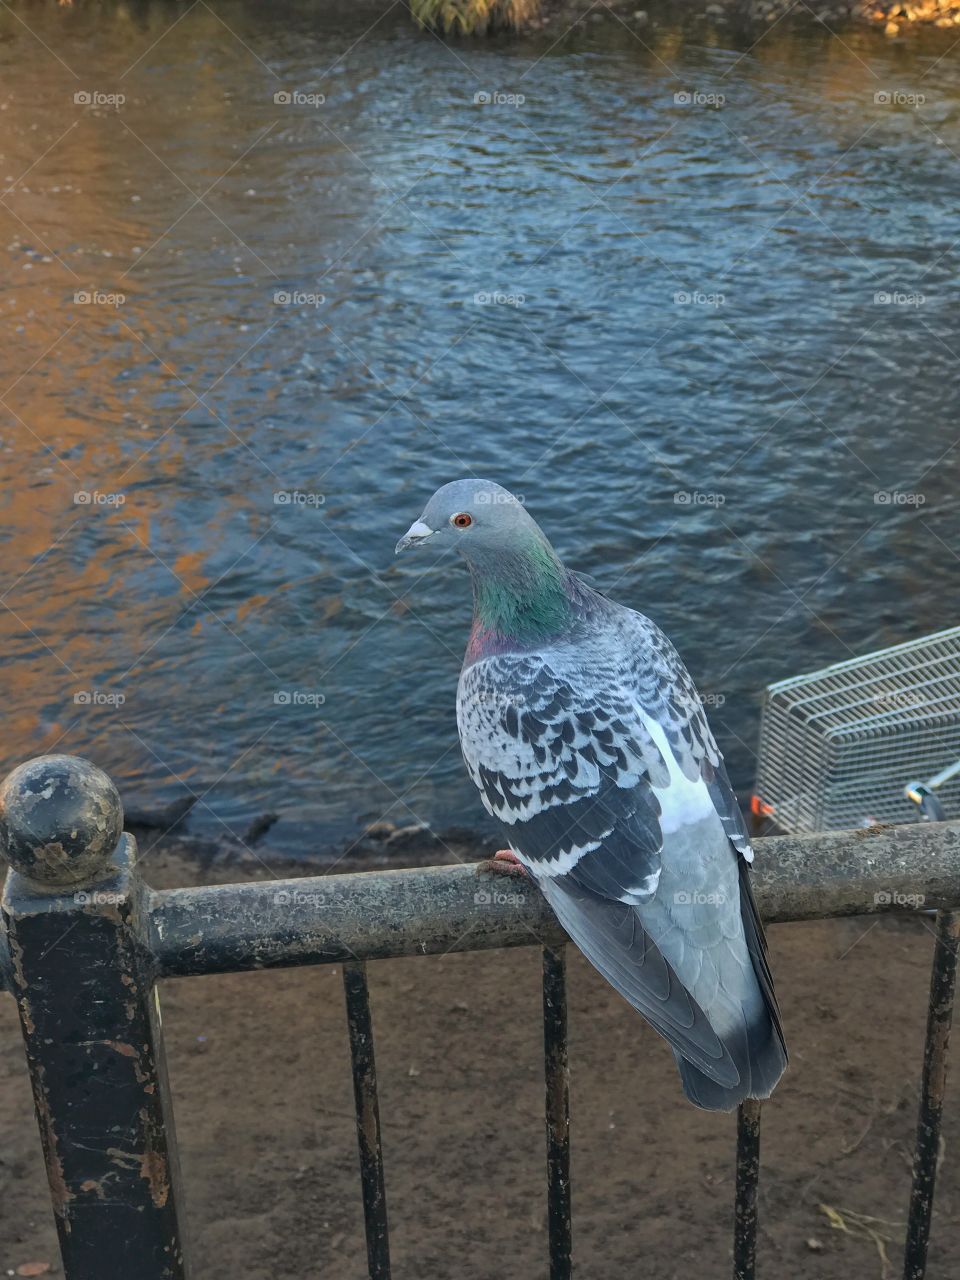 The Pigeon 